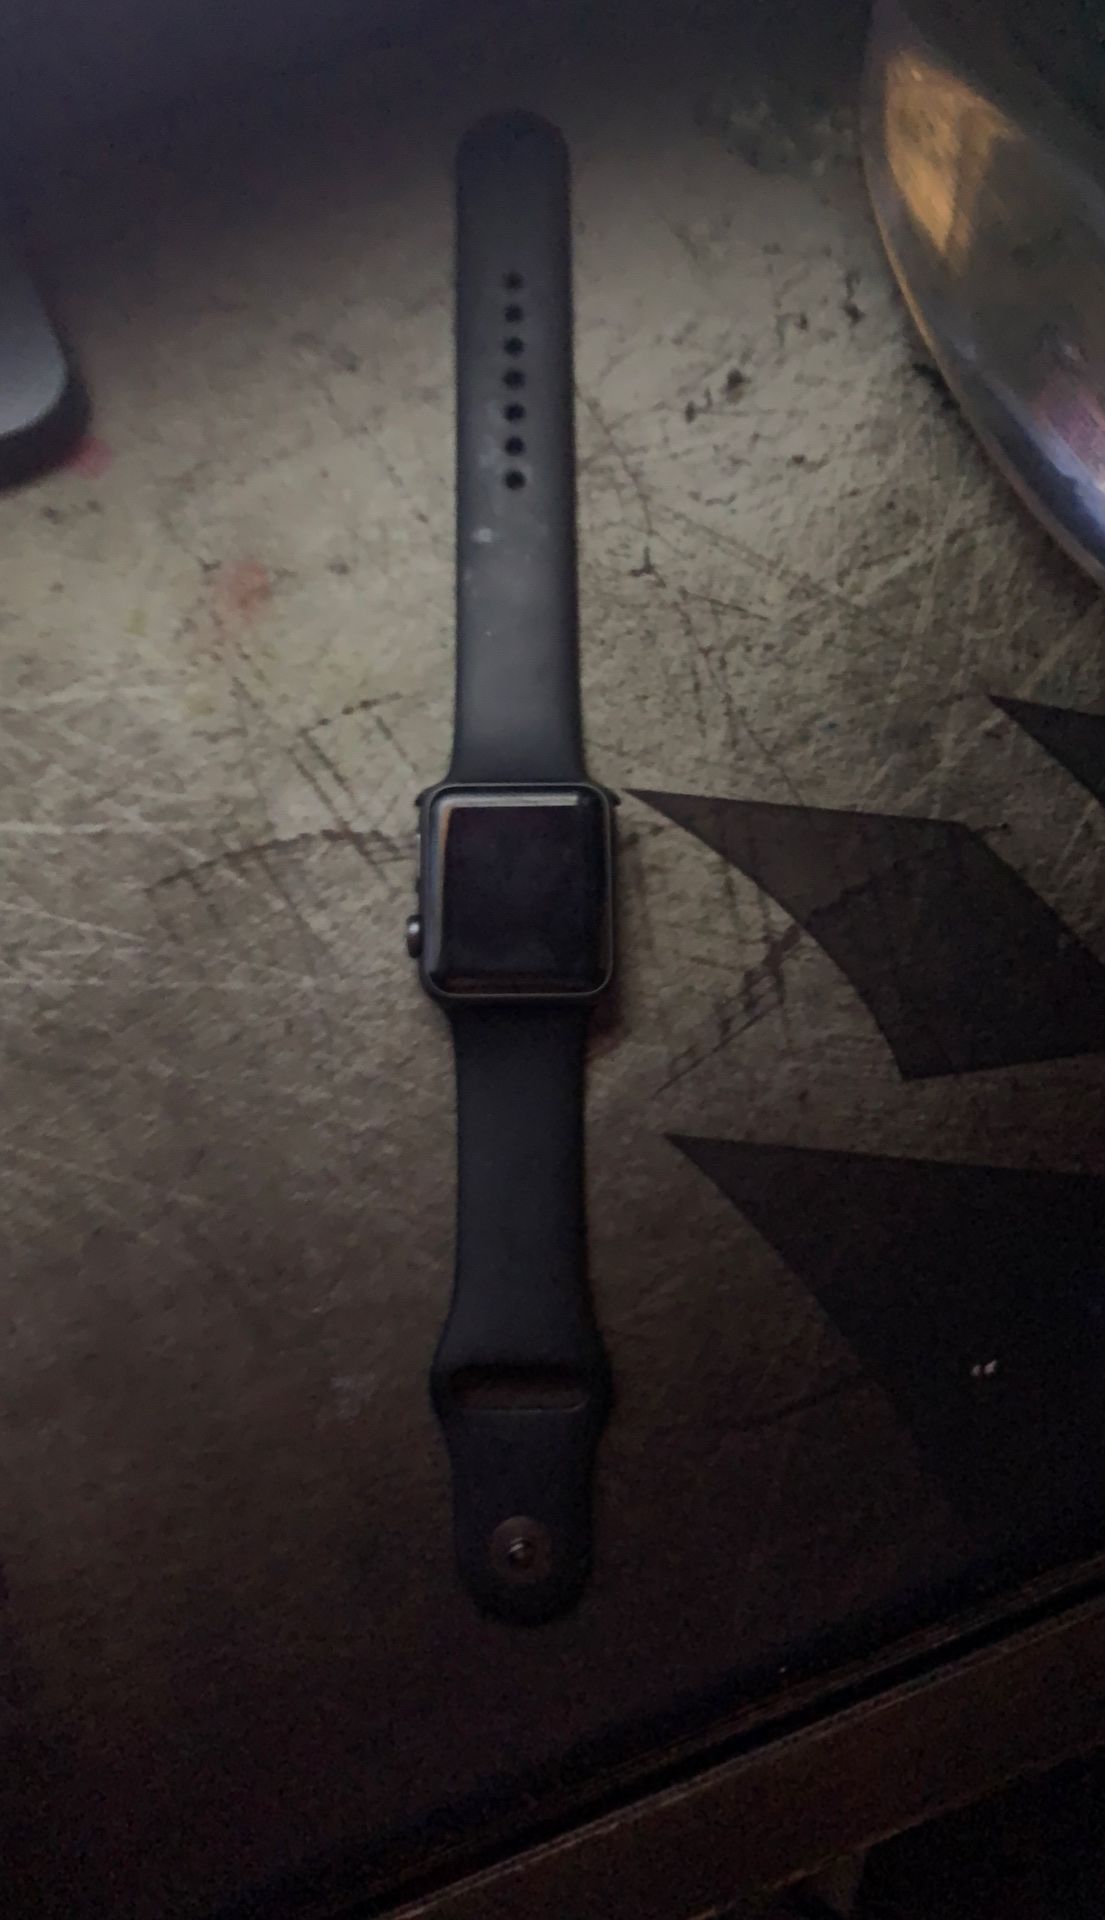 Apple Watch series 1 w/charger